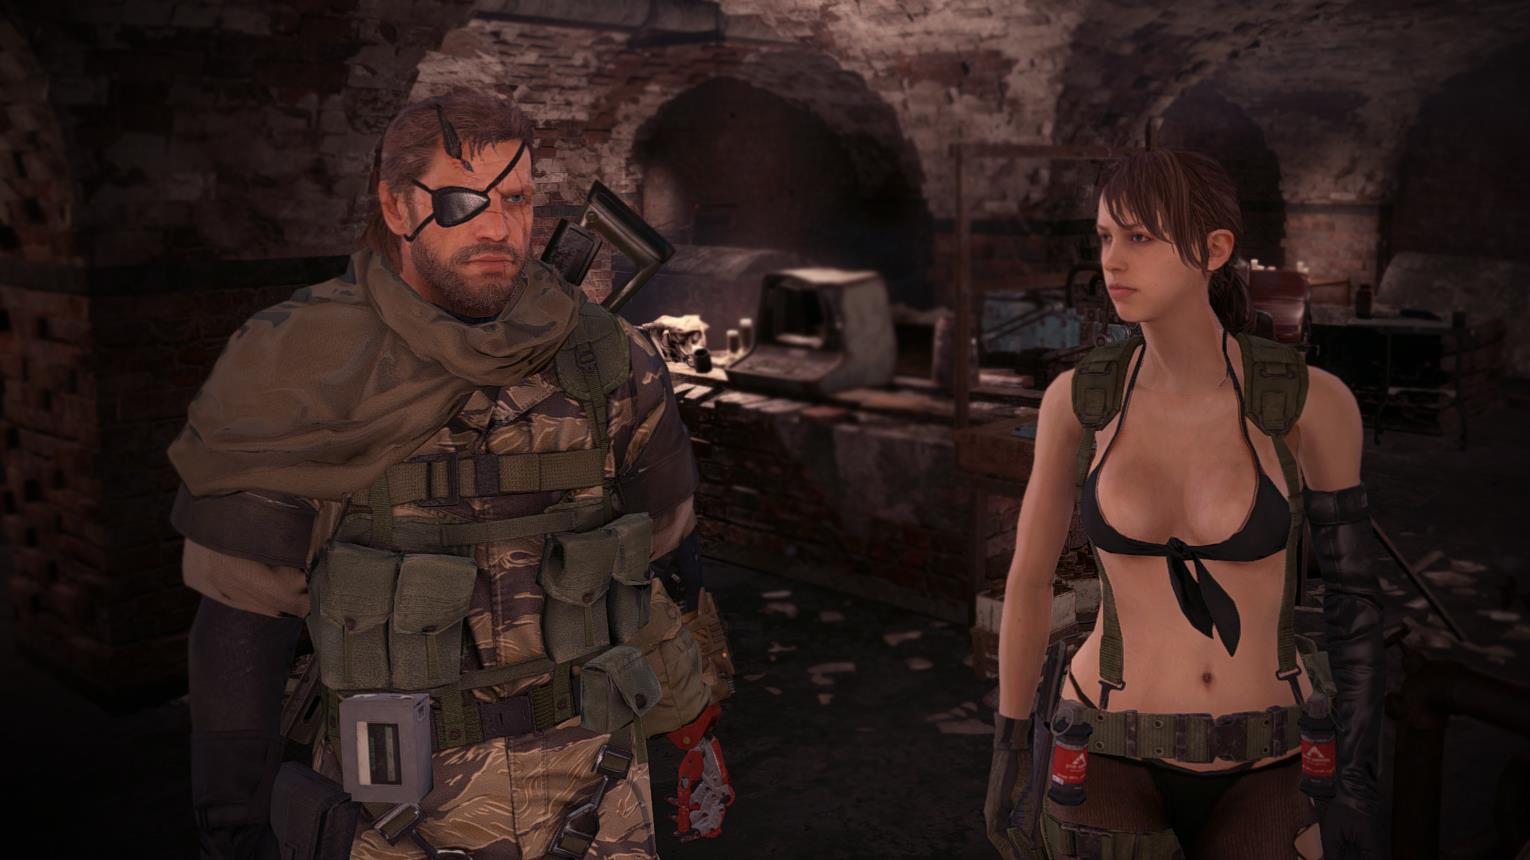 Image for Play as Metal Gear Solid characters in Fallout 4 with this mod